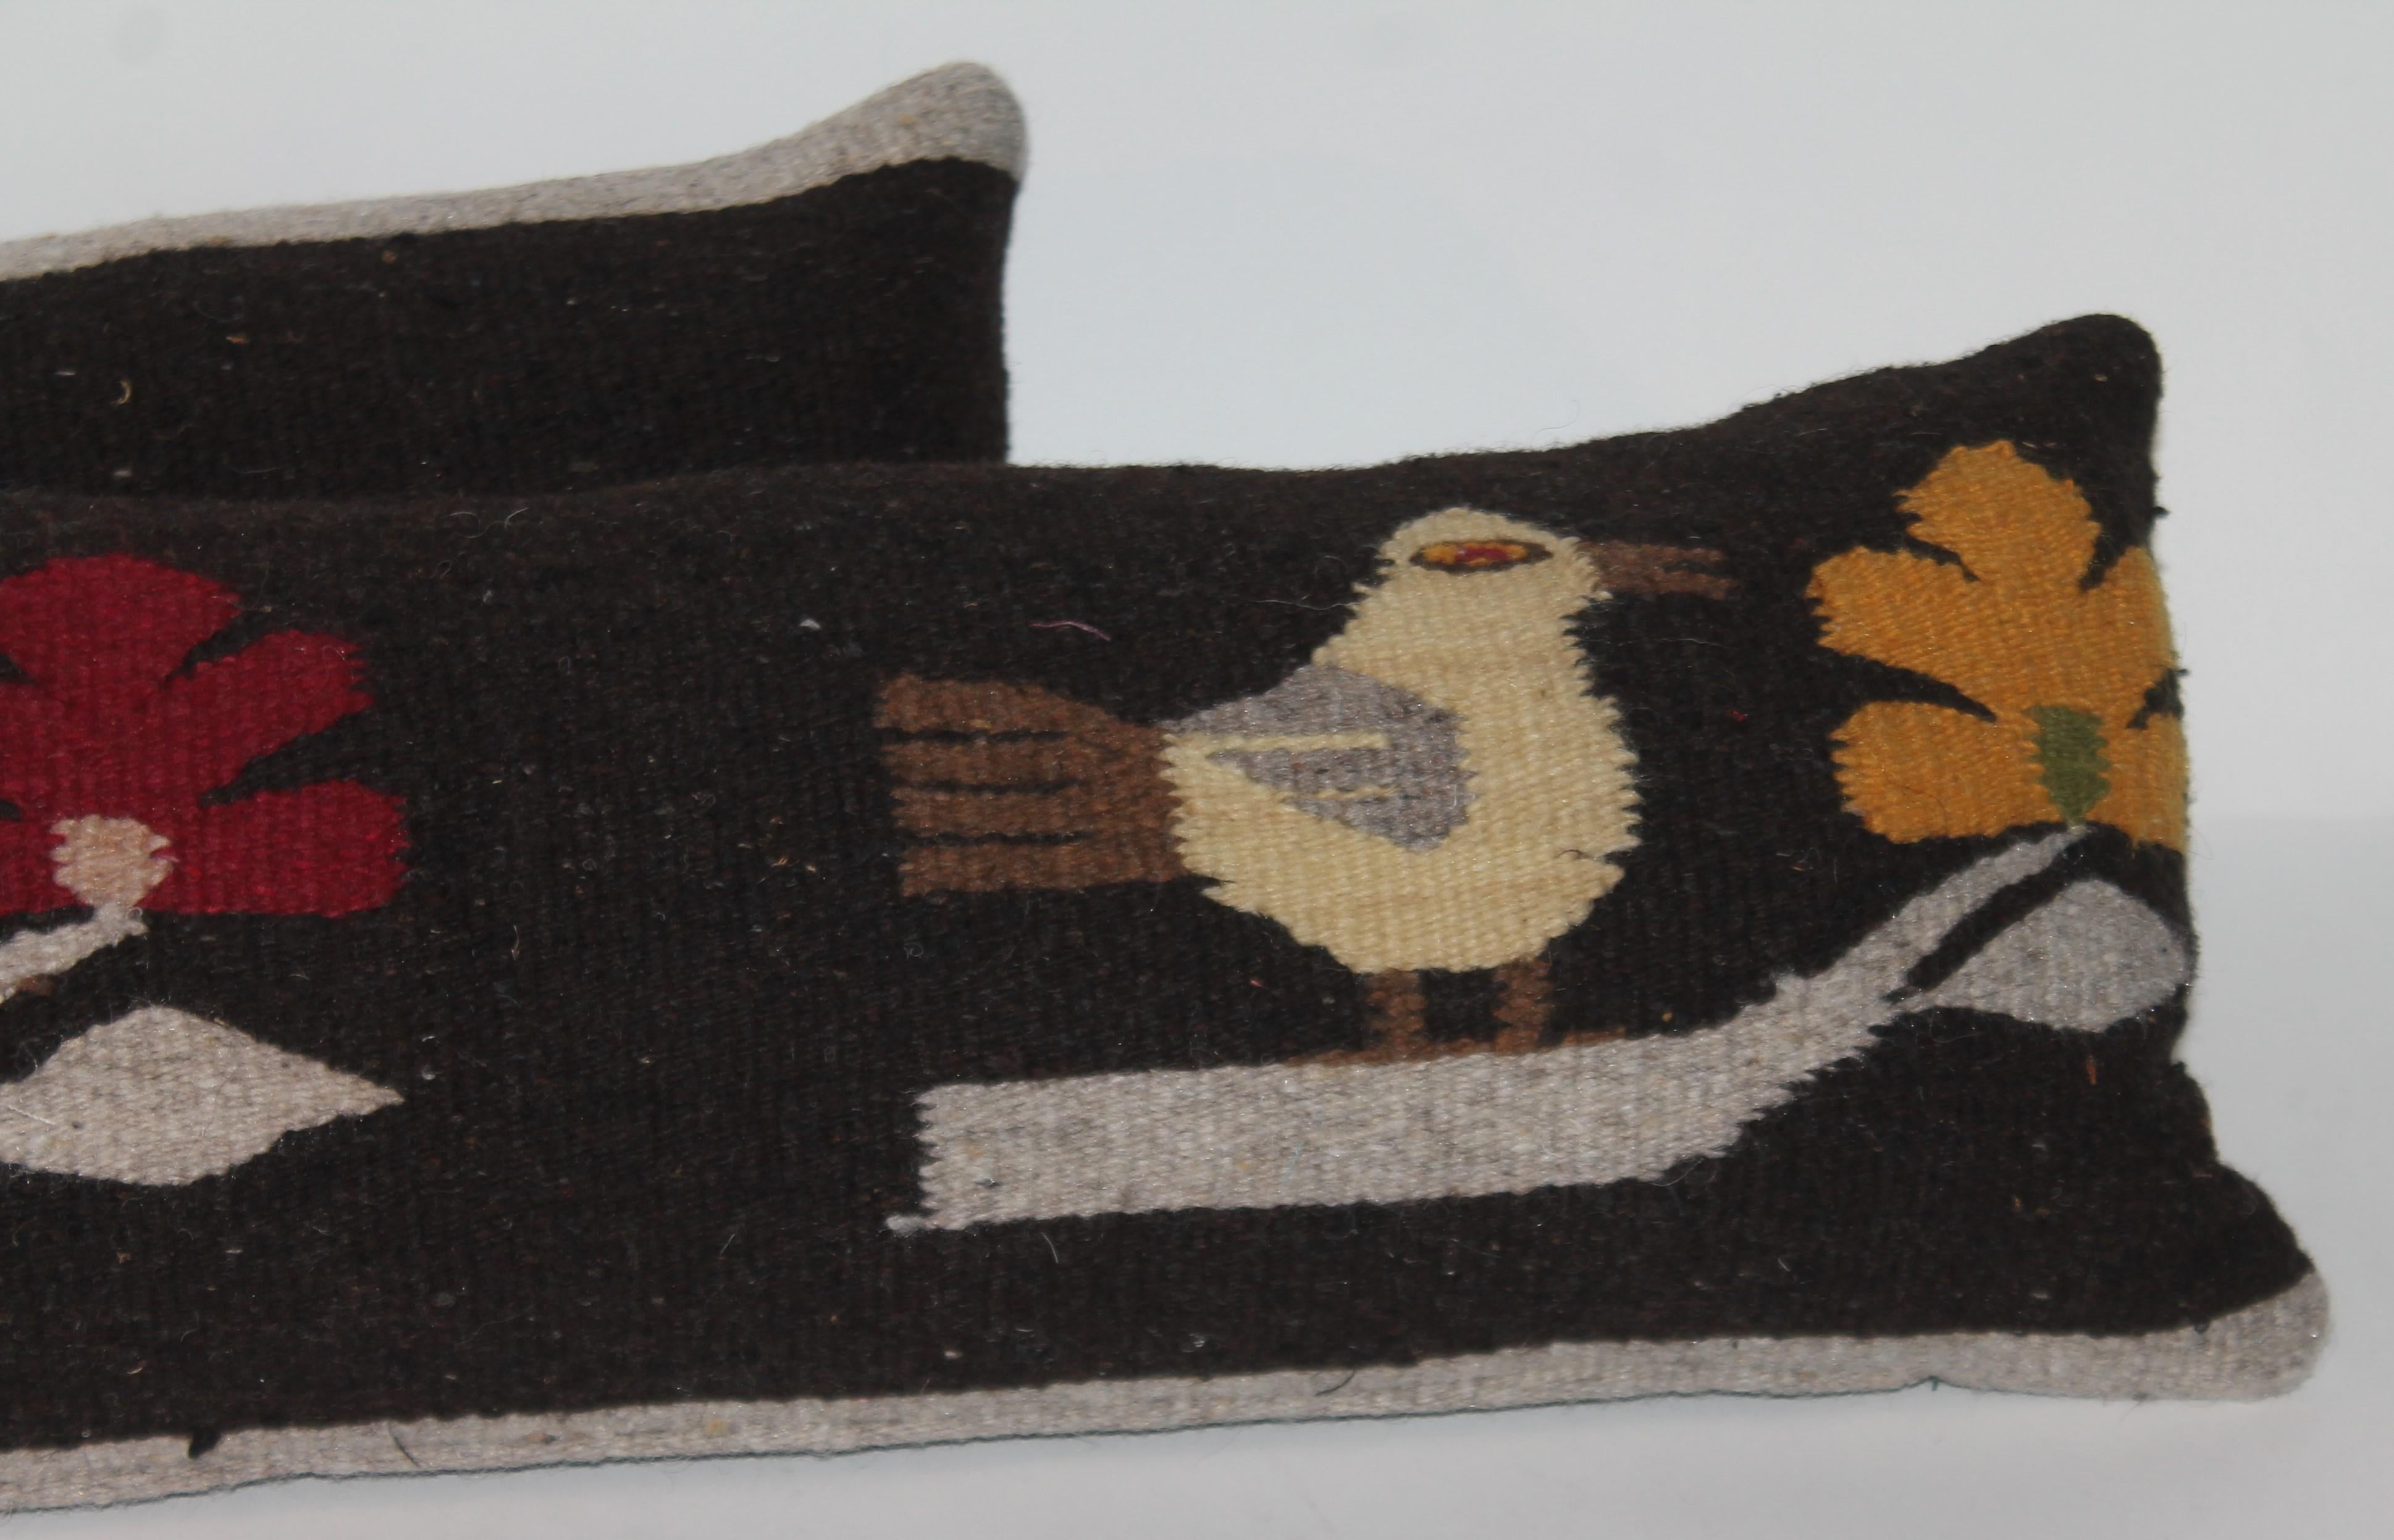 Mexican / American Indian weaving bird pictorial pillows. The backings are in black linen.